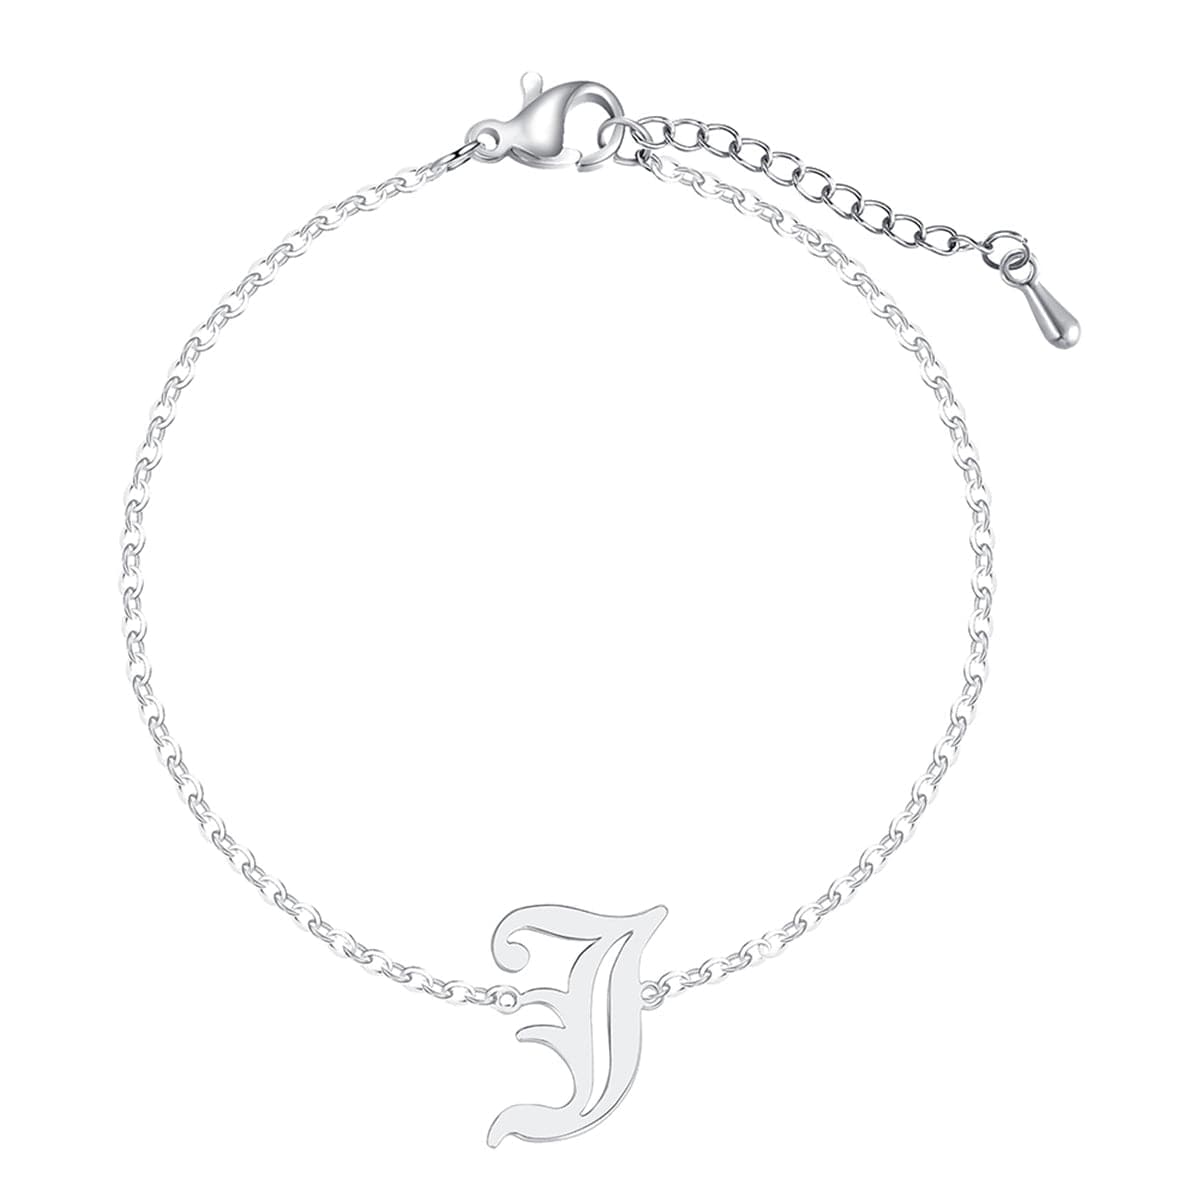 Silver-Plated Old English 'J' Charm Bracelet